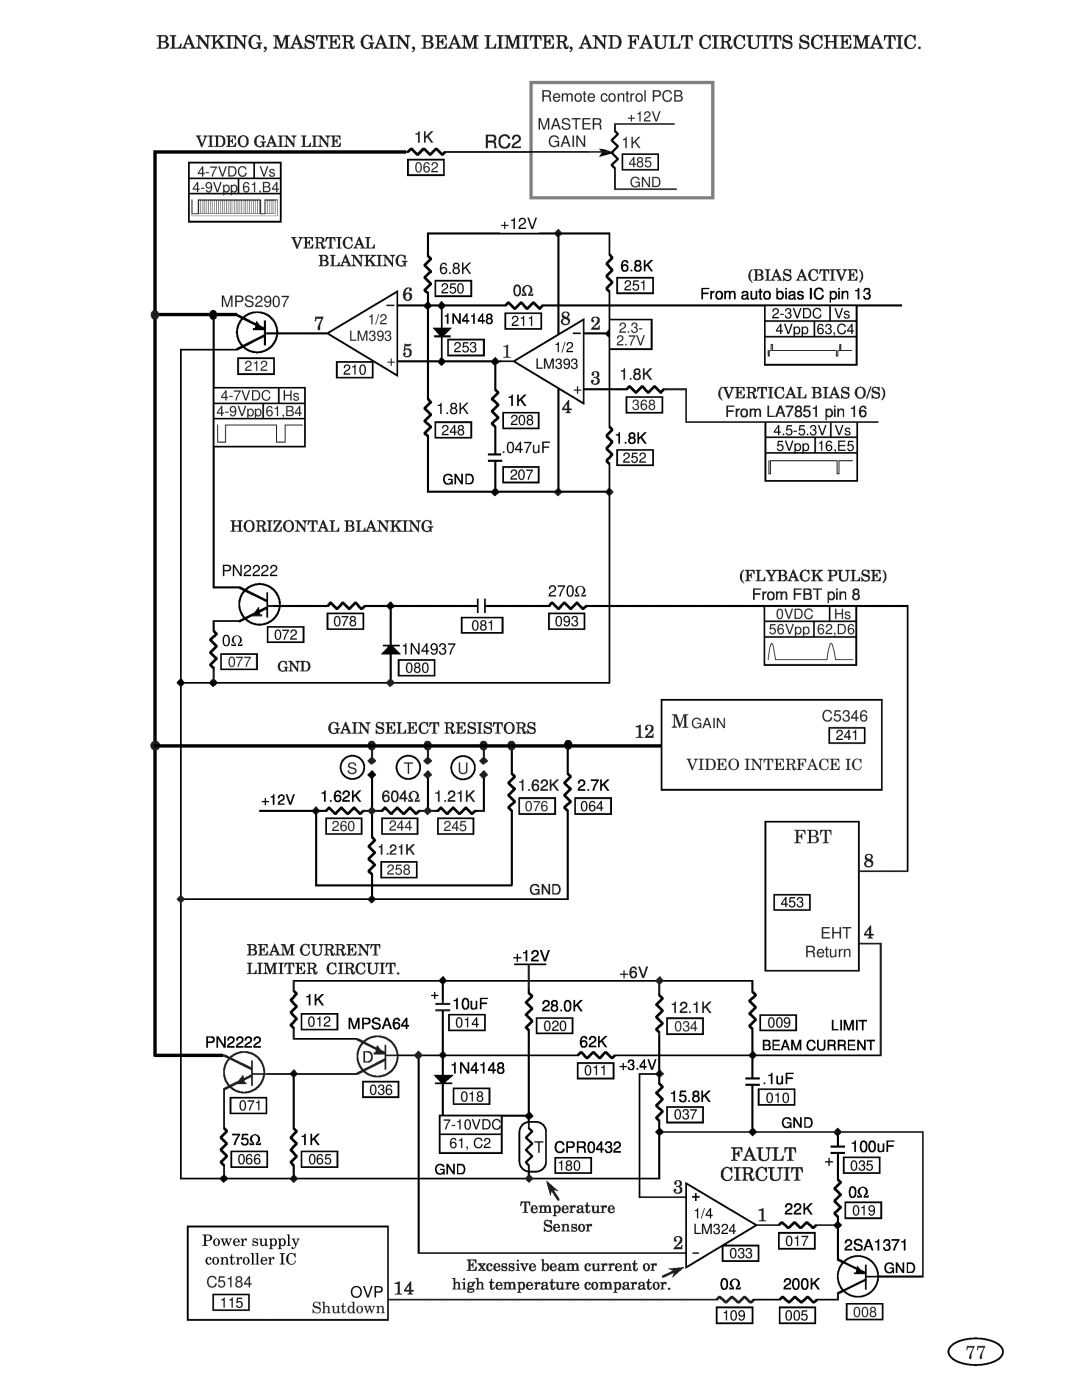 Genius 1793, ISO XFR-75W, 2093, 1493, 2793, 3693, 1993 manual Blanking, Master Gain, Beam Limiter, And Fault Circuits Schematic 